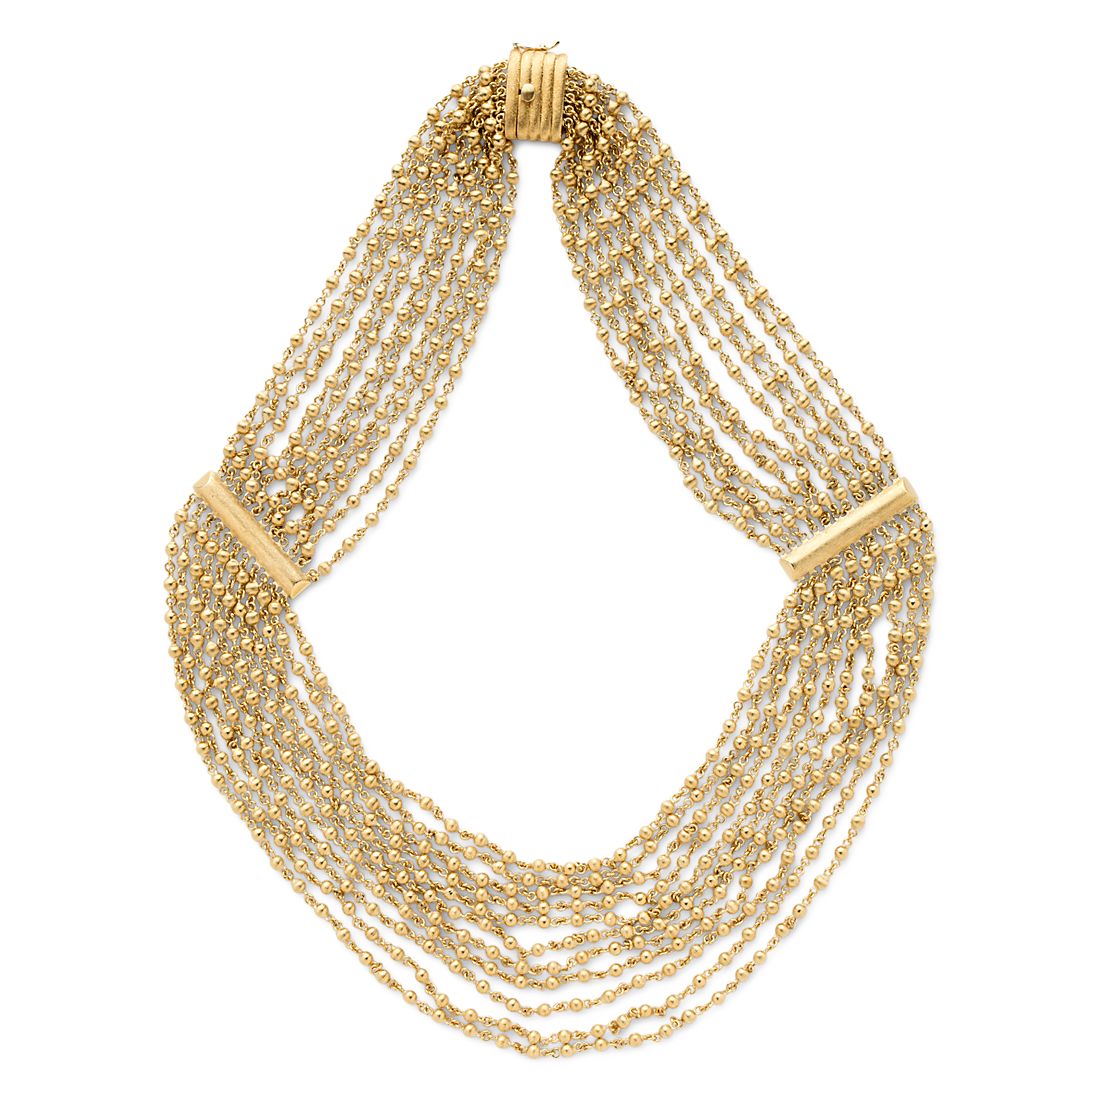 Estate Multi-Strand Beaded Necklace in 18k Yellow Gold